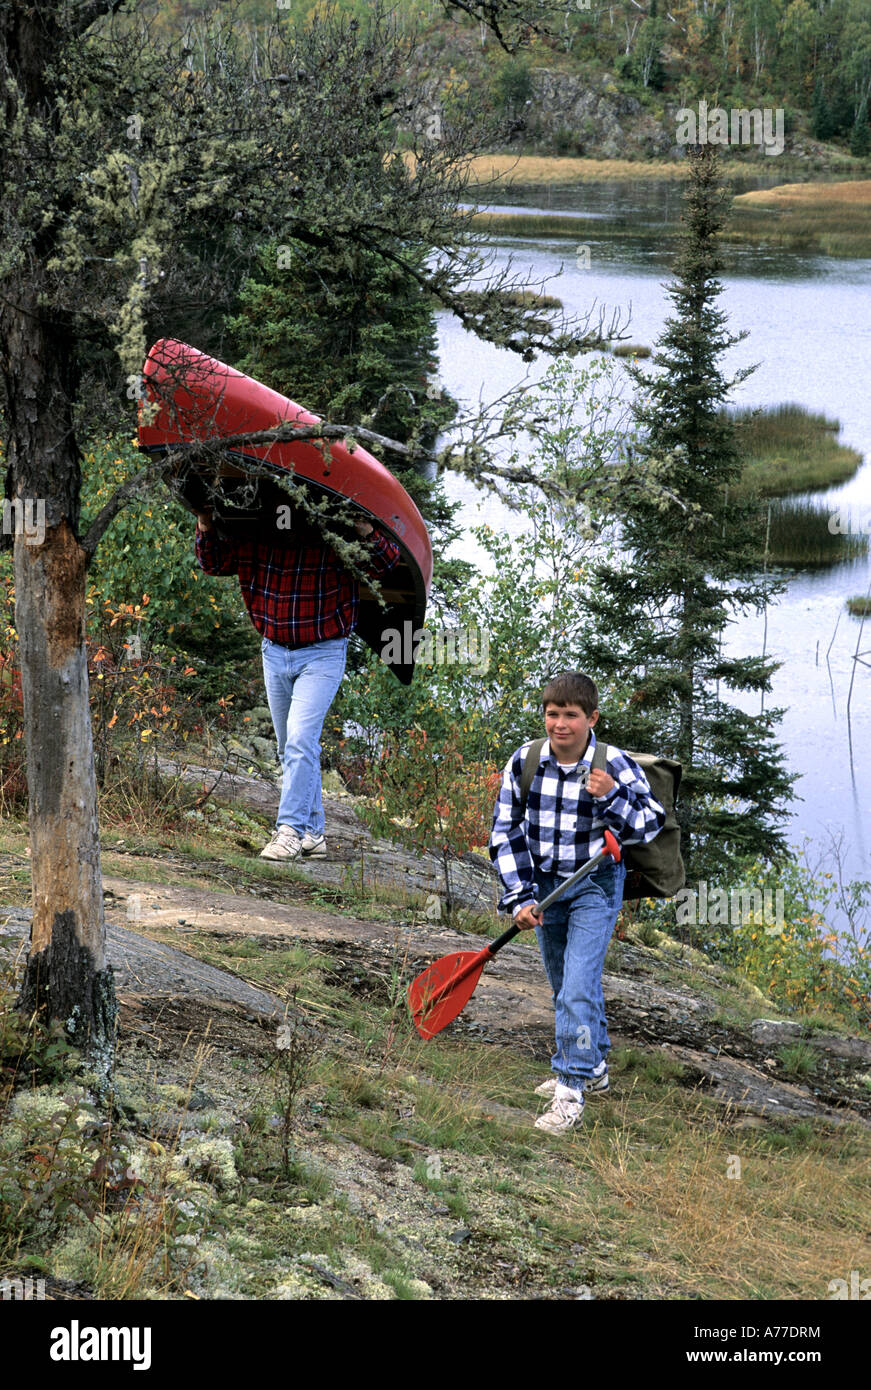 DAD AND SON PORTAGE CANOE NEAR WOOD LAKE IN THE BOUNDARY WATERS CANOE AREA WILDERNESS, NORTHERN MINNESOTA. LATE SUMMER. Stock Photo